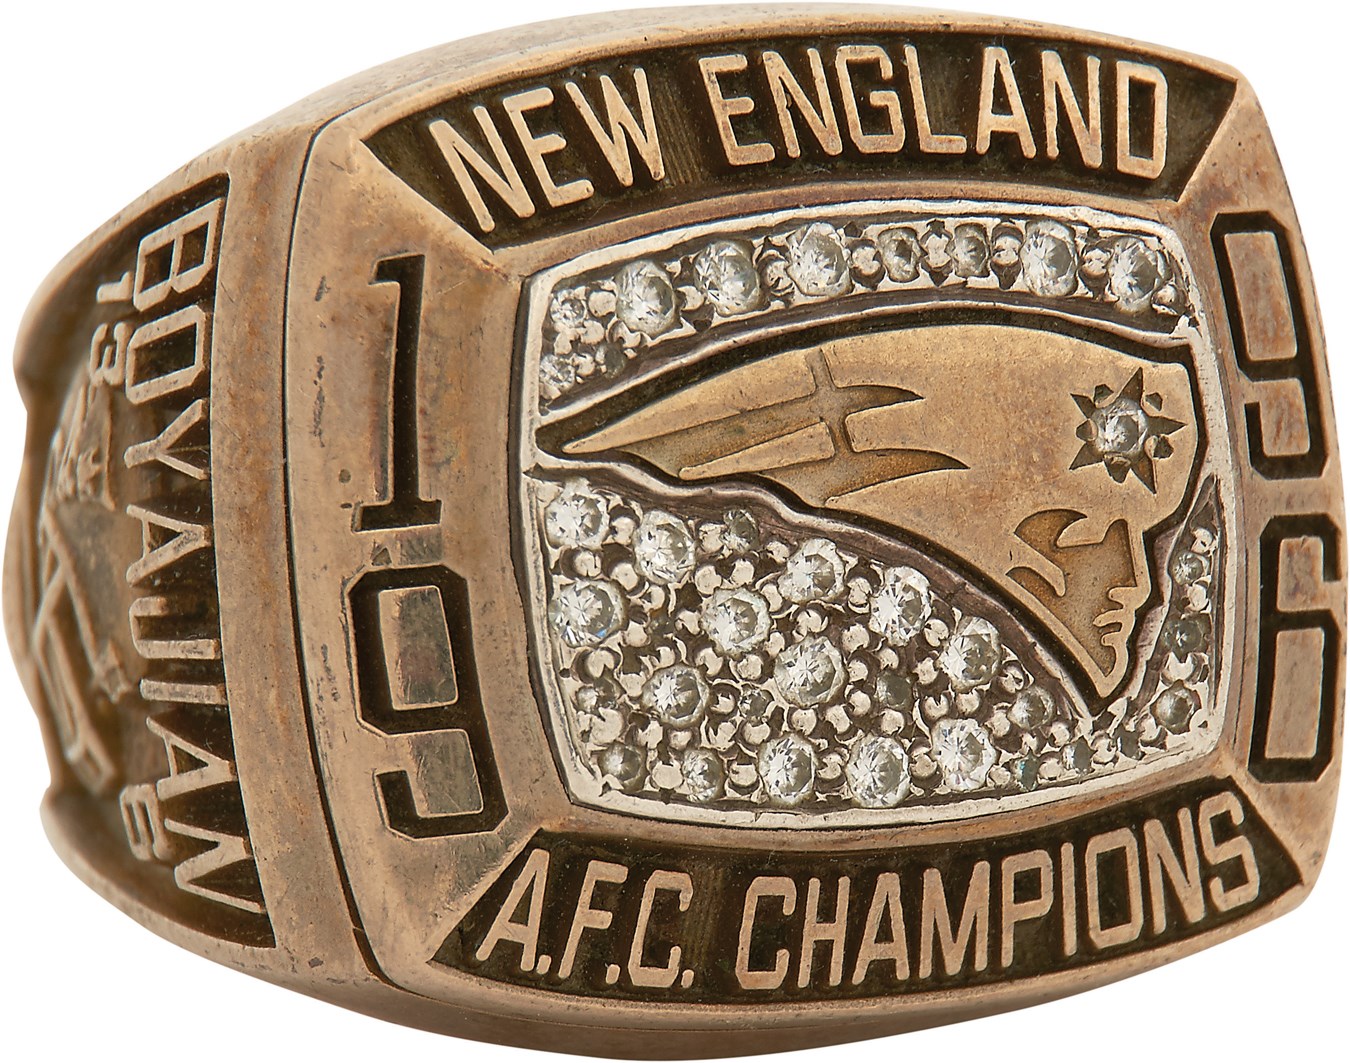 Sports Rings And Awards - 1996 New England Patriots AFC Championship Ring - Presented to Long Time Executive